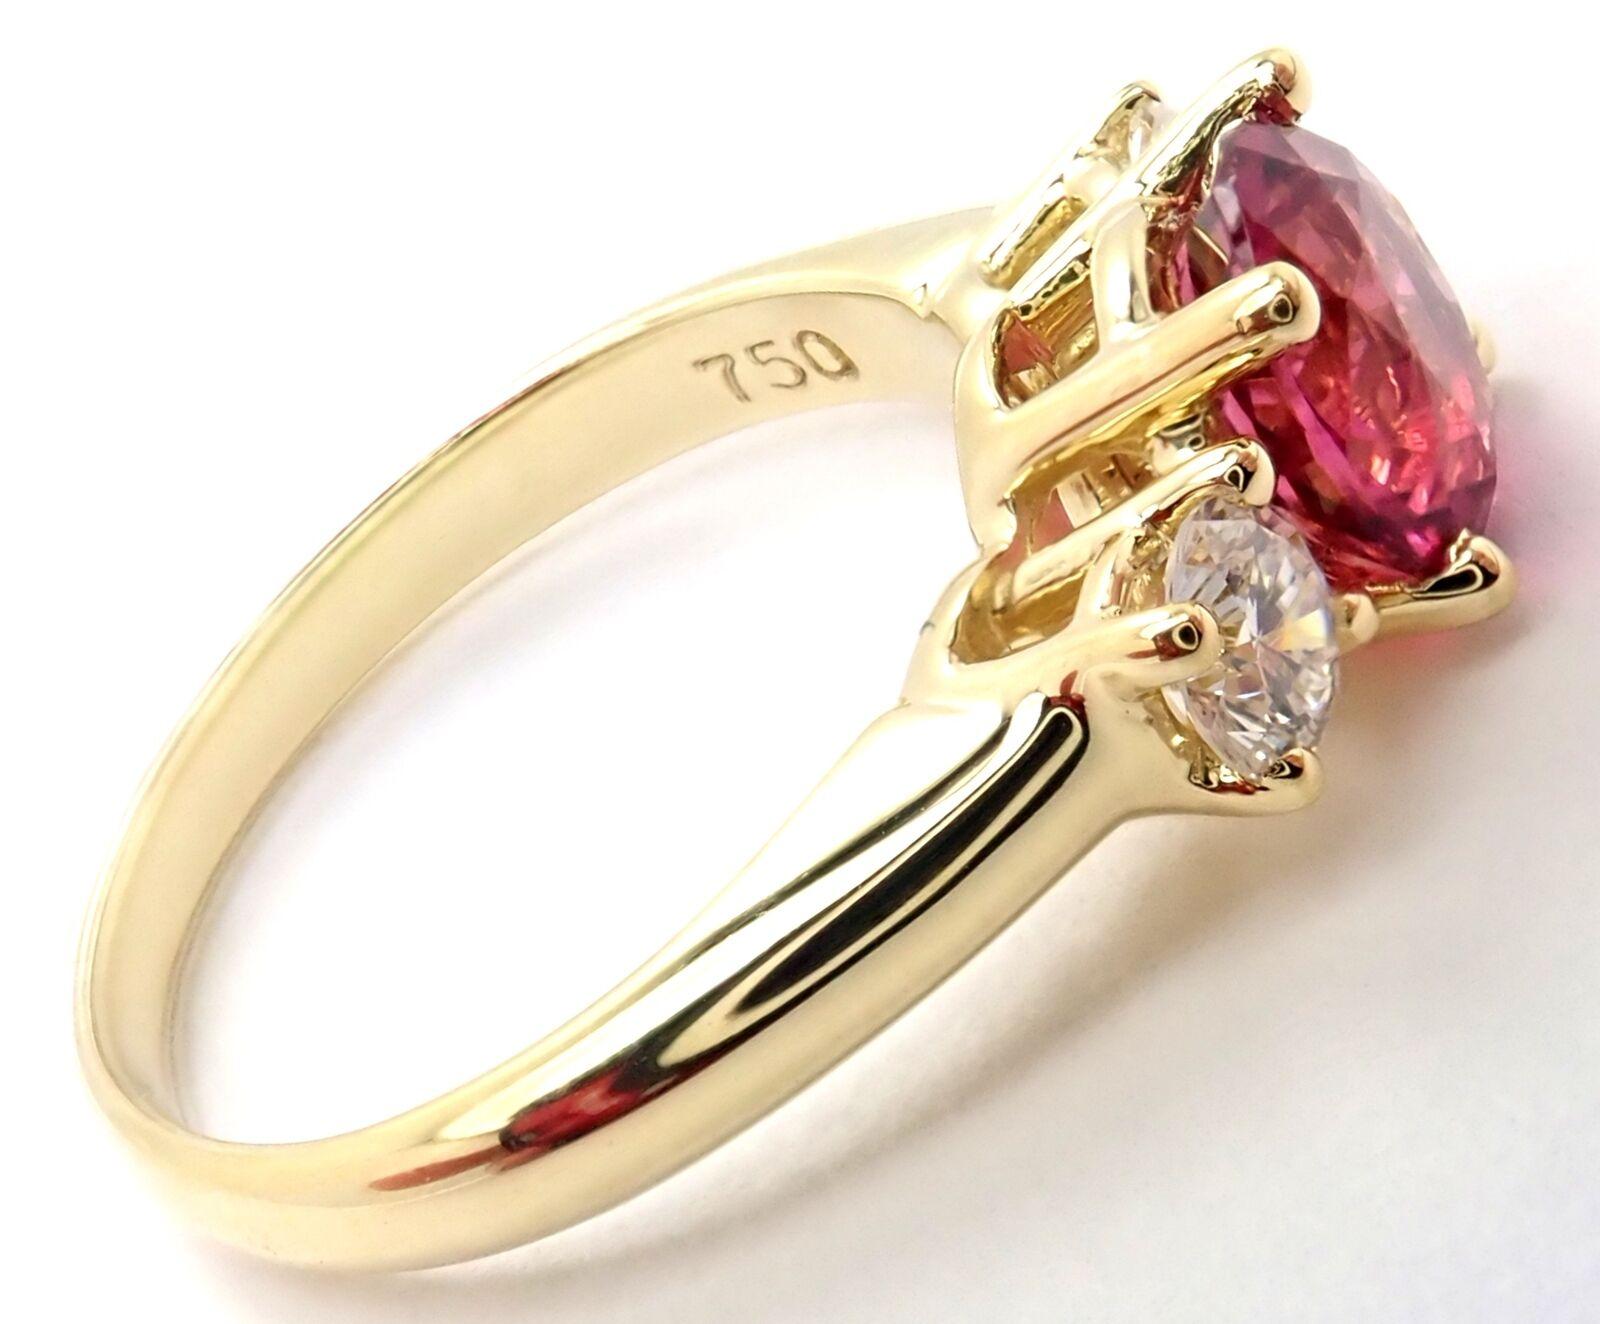 18k Yellow Gold Diamond And Pink Tourmaline Three Stone Band Ring by Tiffany & Co. 
With 2 Round Brilliant Cut Diamonds VS1 clarity, G color, Total weight Approximately .30ct
1 Round pink tourmaline 7mm total weight approximately 1.2ct
Details:
Ring